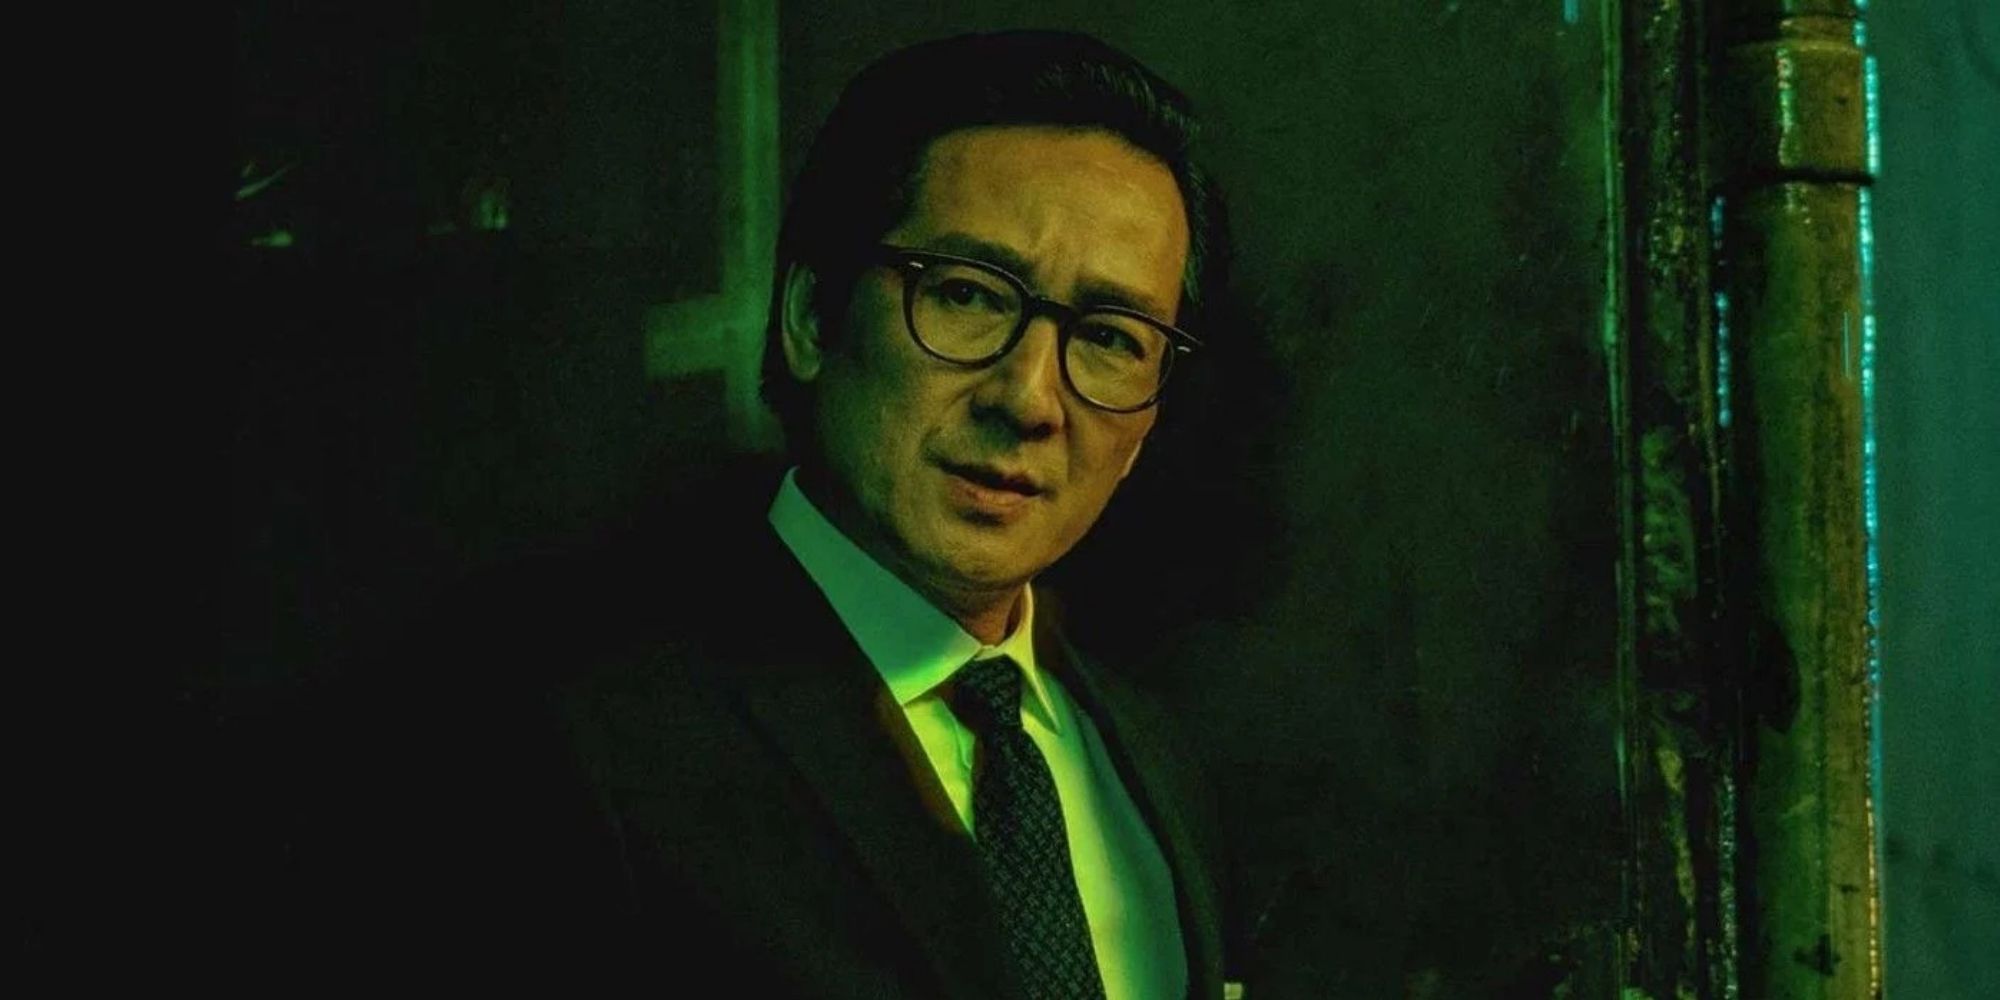 Waymond Wang (Ke Huy Quan) as a businessman in 'Everything Everywhere All At Once' (2022)